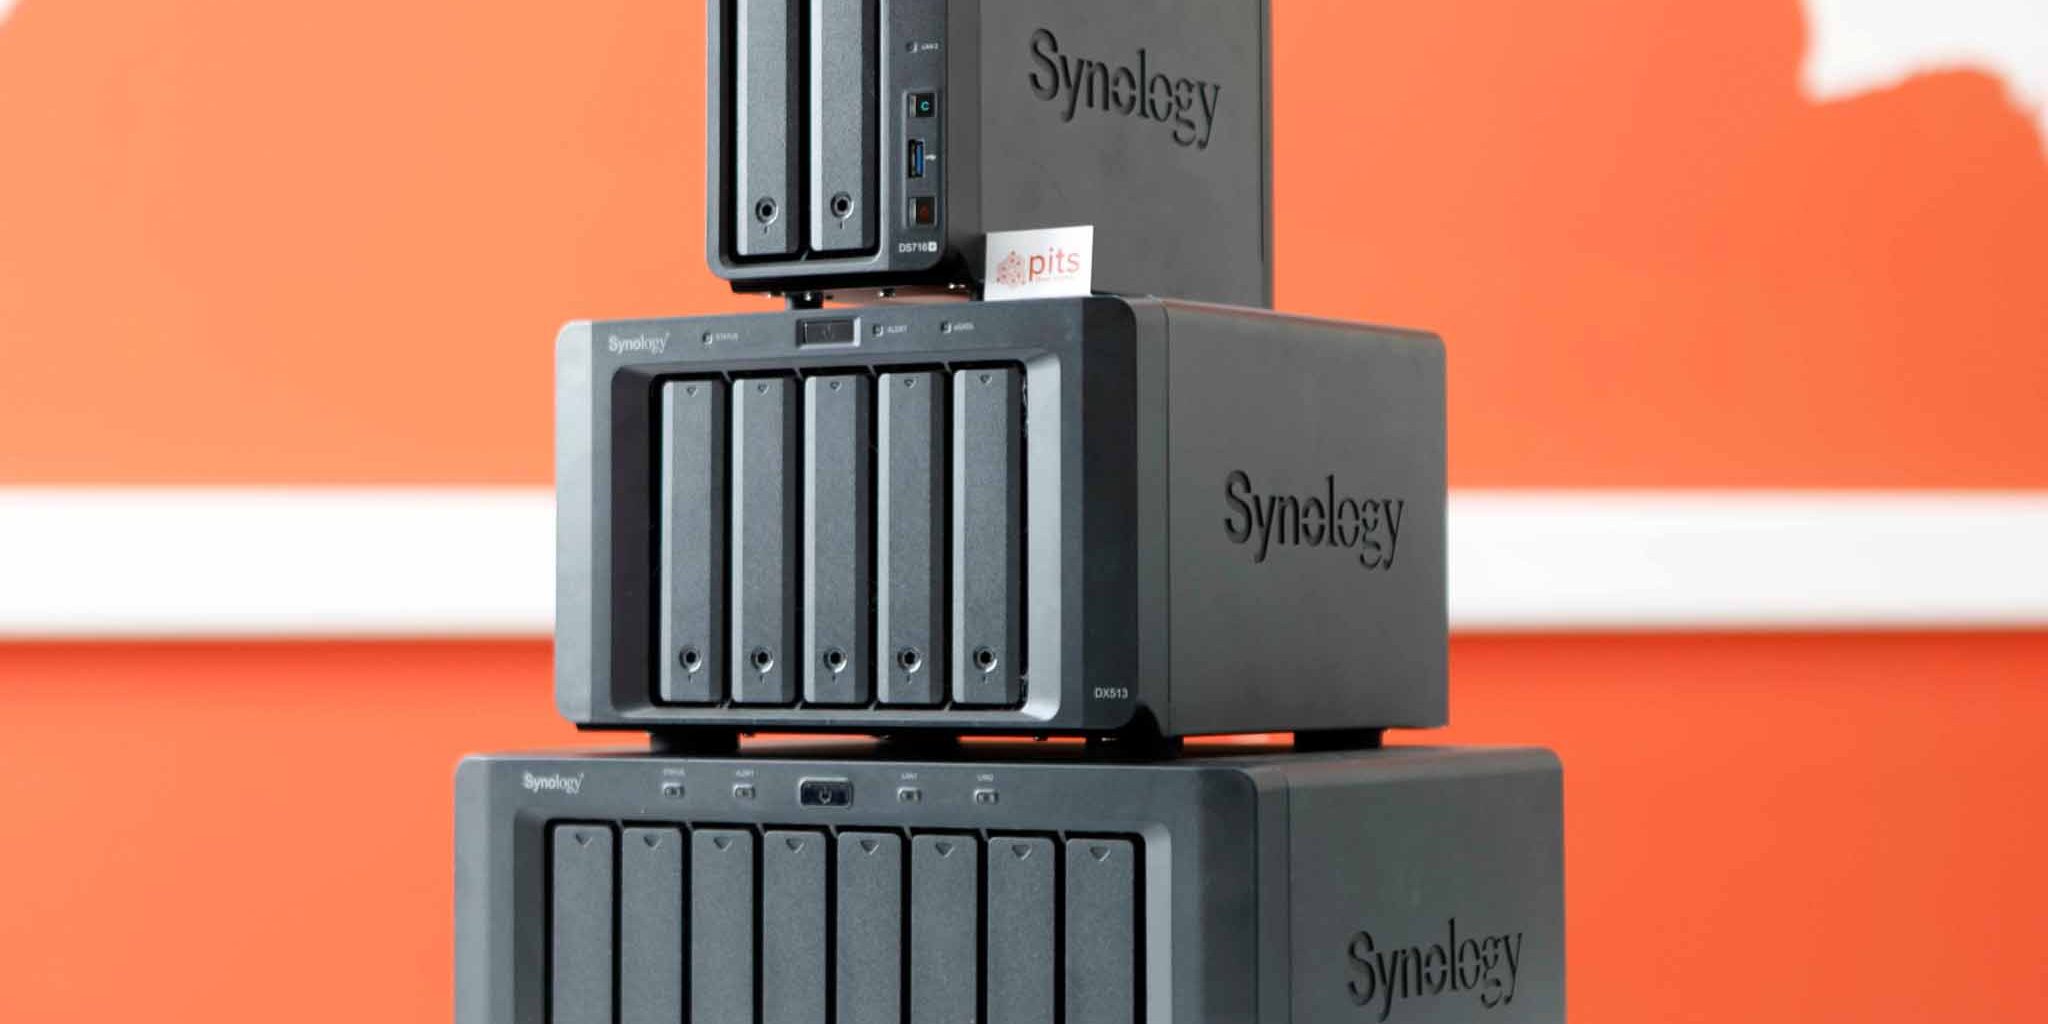 How Power Surge Affected Synology NAS - Successfully Restored